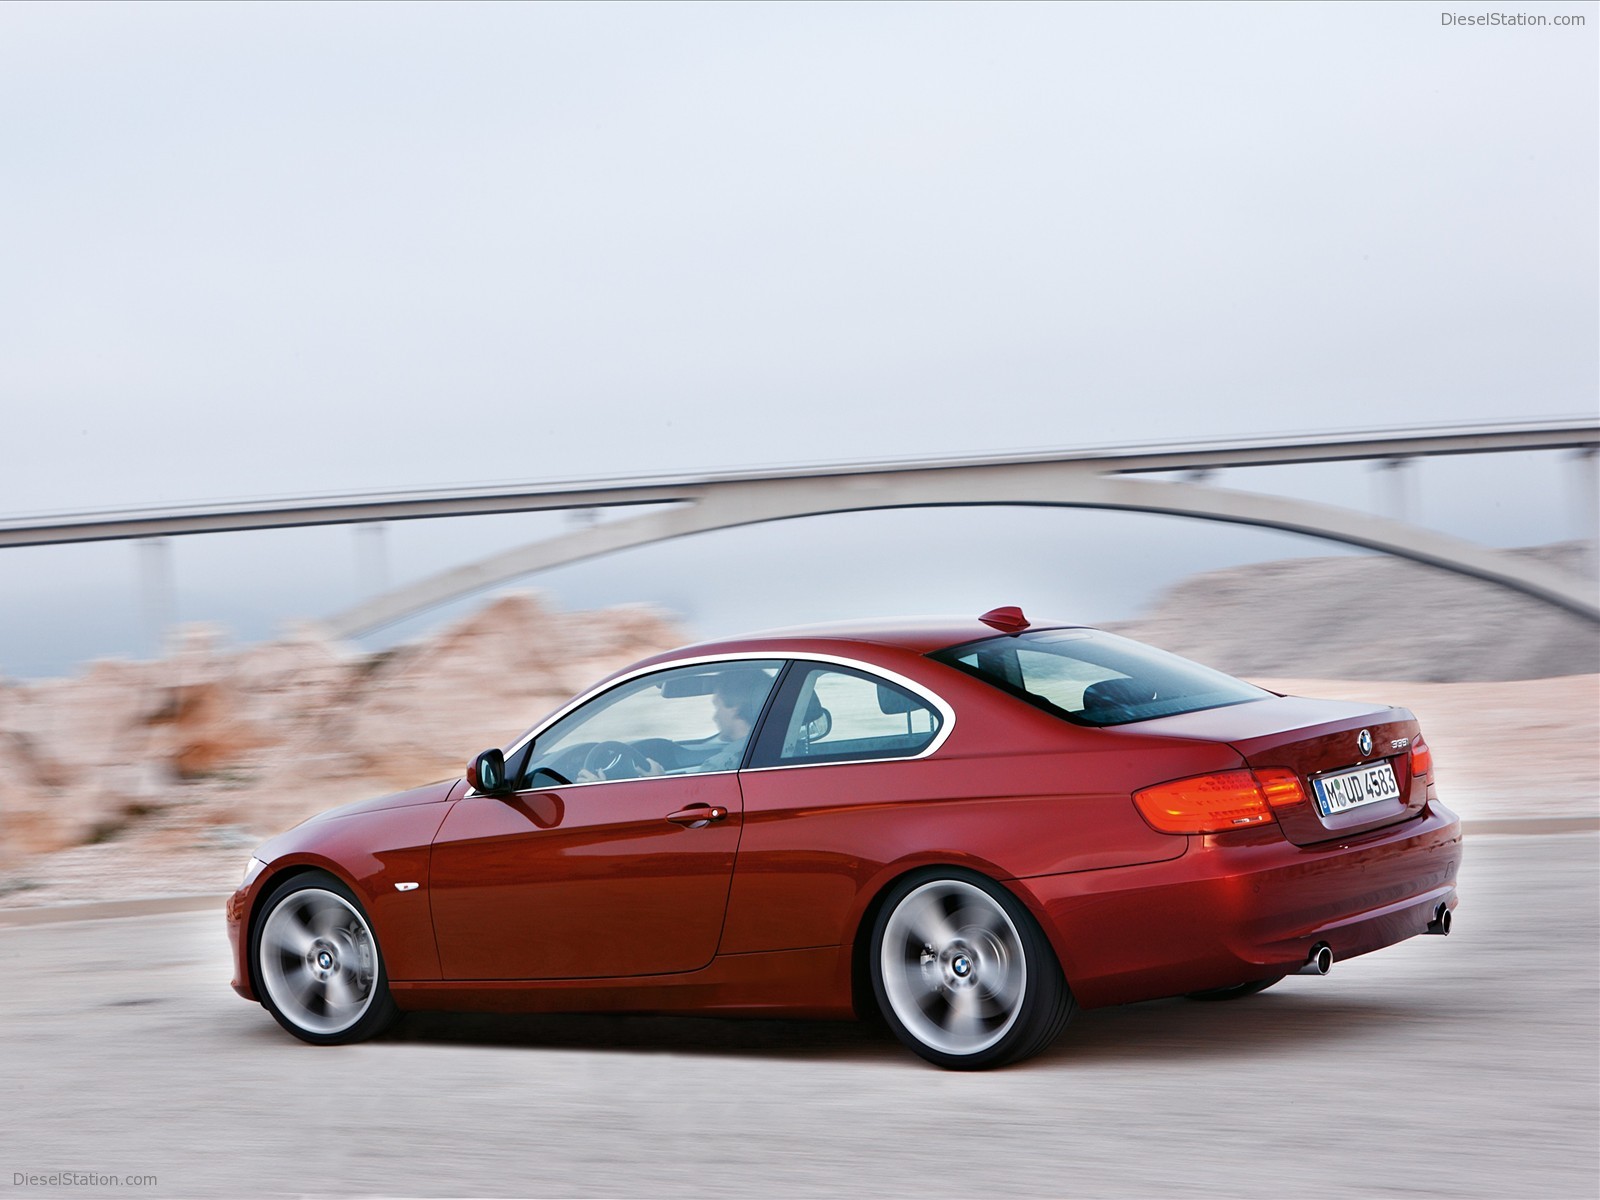 BMW Series 3 Coupe and Convertible 2011 - Car Image at Dieselstation